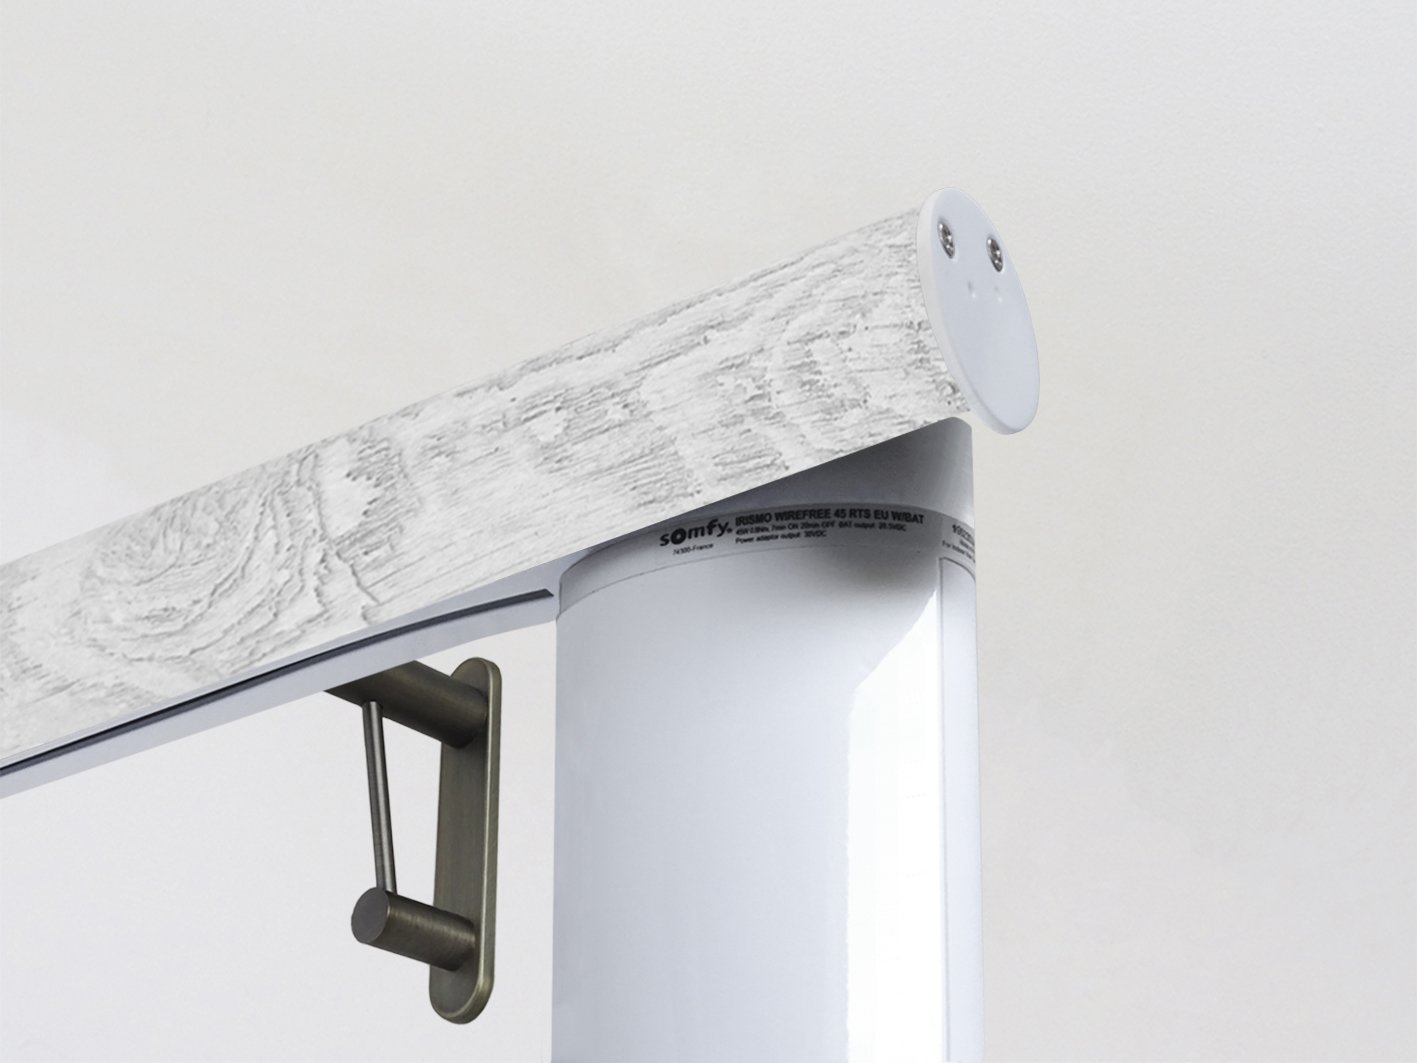 Motorised electric curtain pole in nordic white driftwood, wireless & battery powered using the Somfy Glydea track | Walcot House UK curtain pole specialists